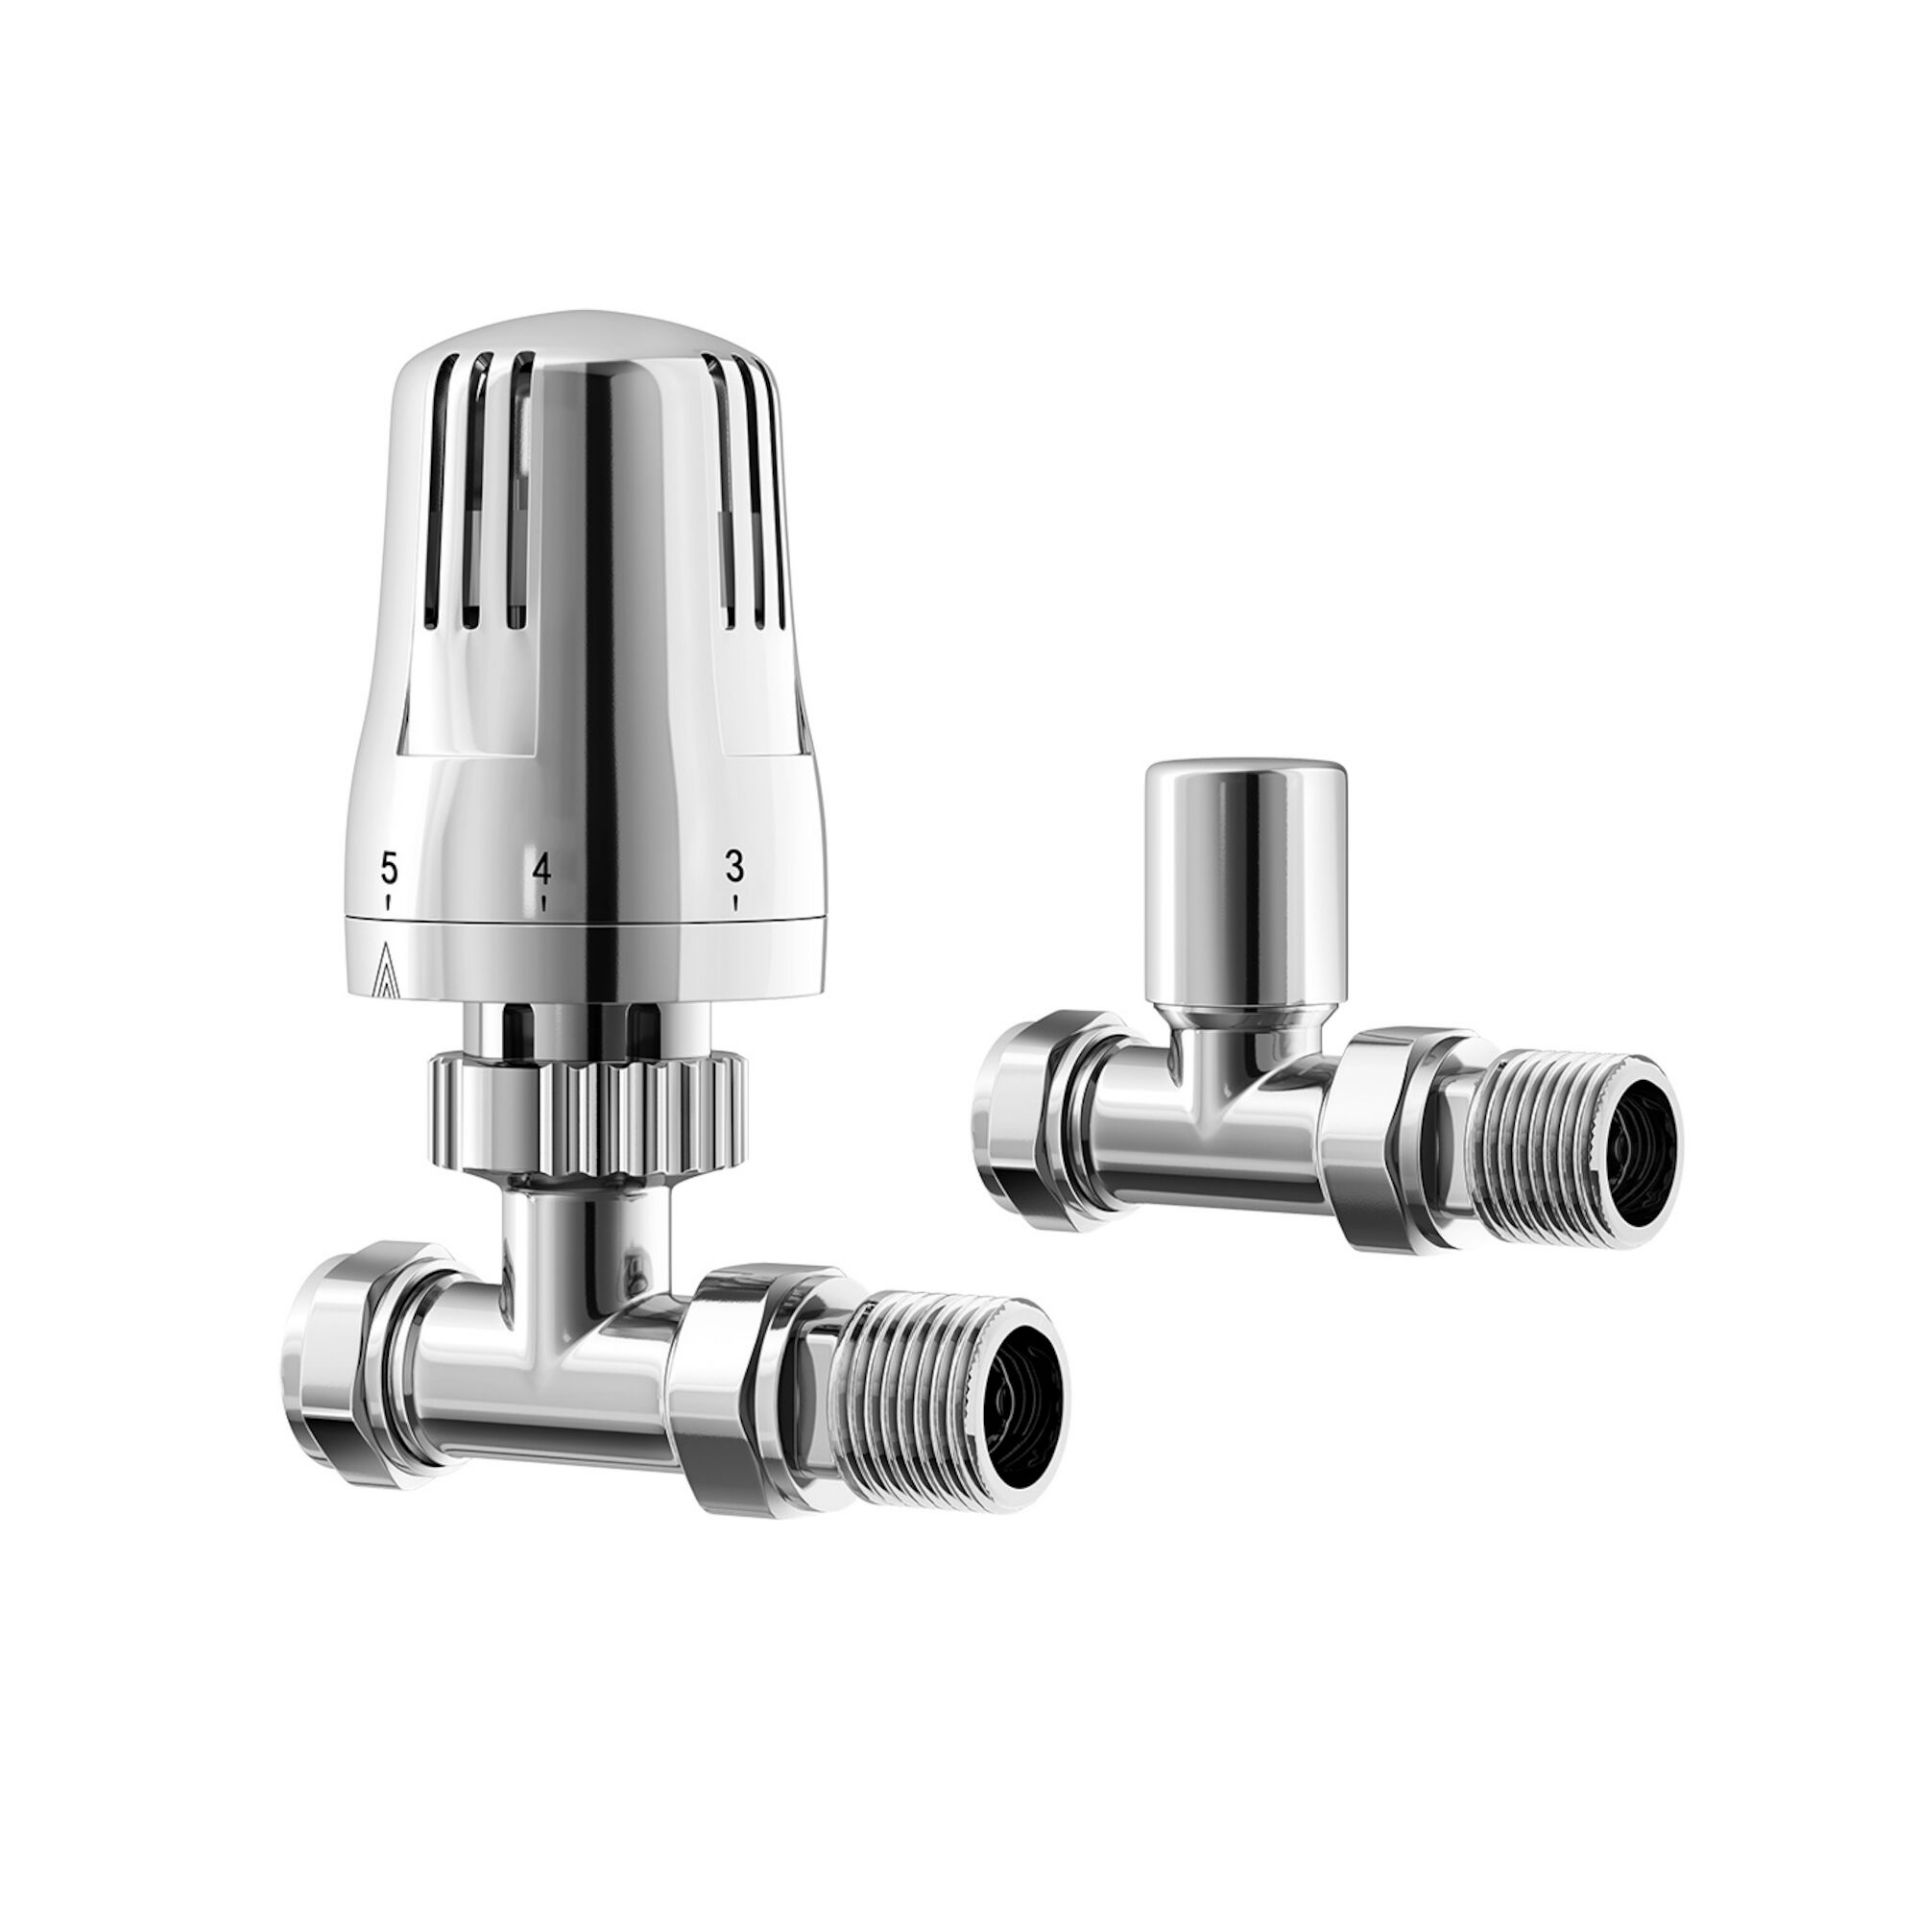 (MP69) 15mm Standard Connection Thermostatic Straight Chrome Radiator Valves Chrome Plated Solid - Image 2 of 3